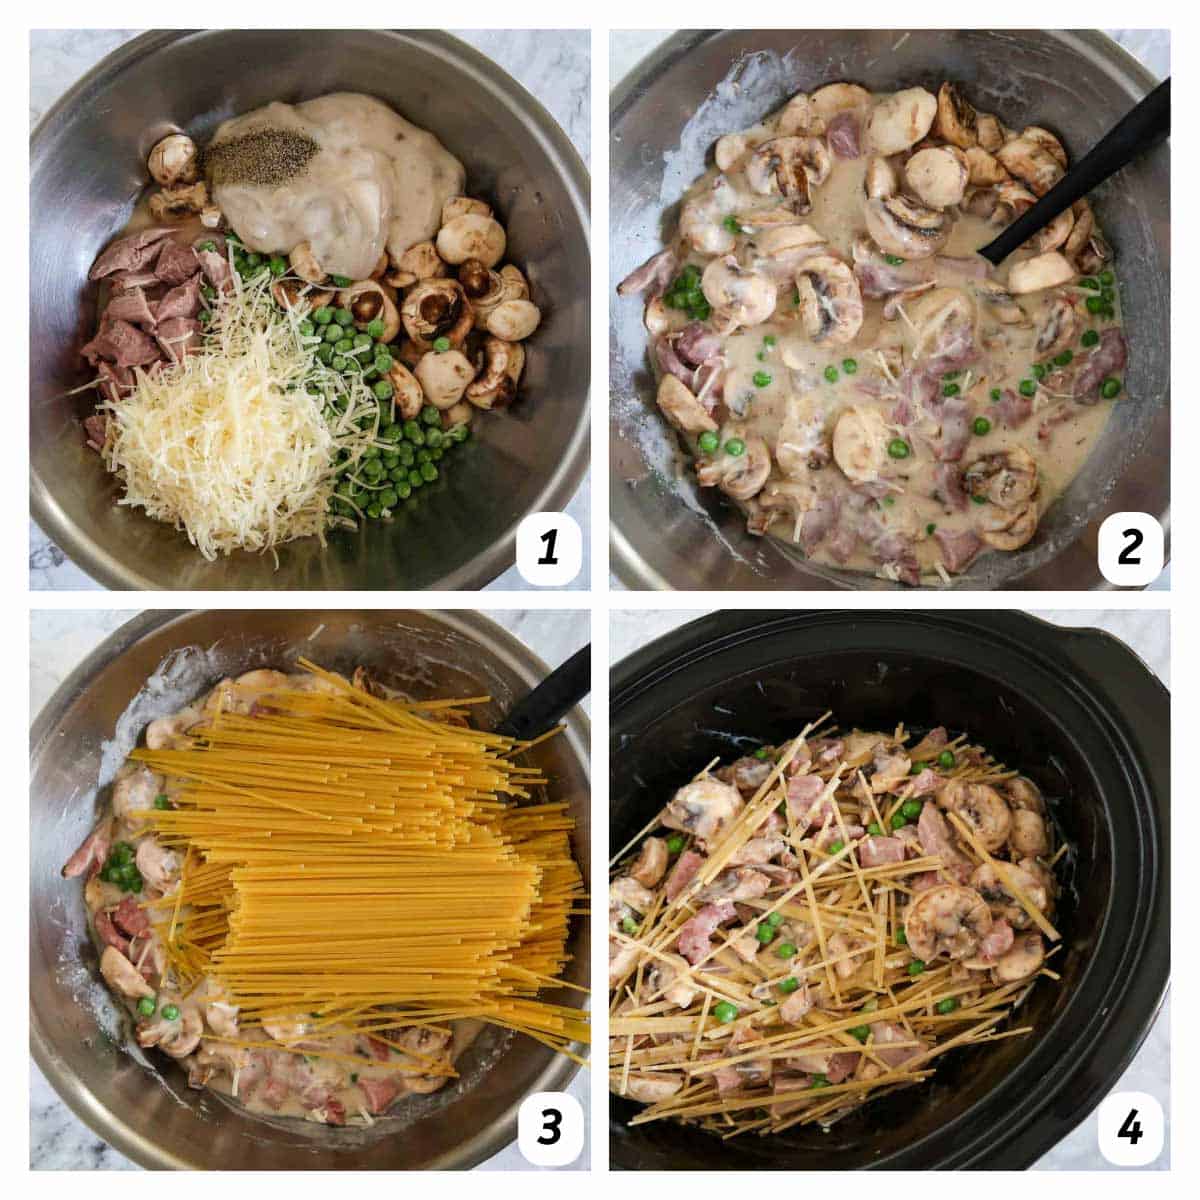 Four panel grid of process shots - combining ingredients in a bowl and transferring to the crock pot to cook.